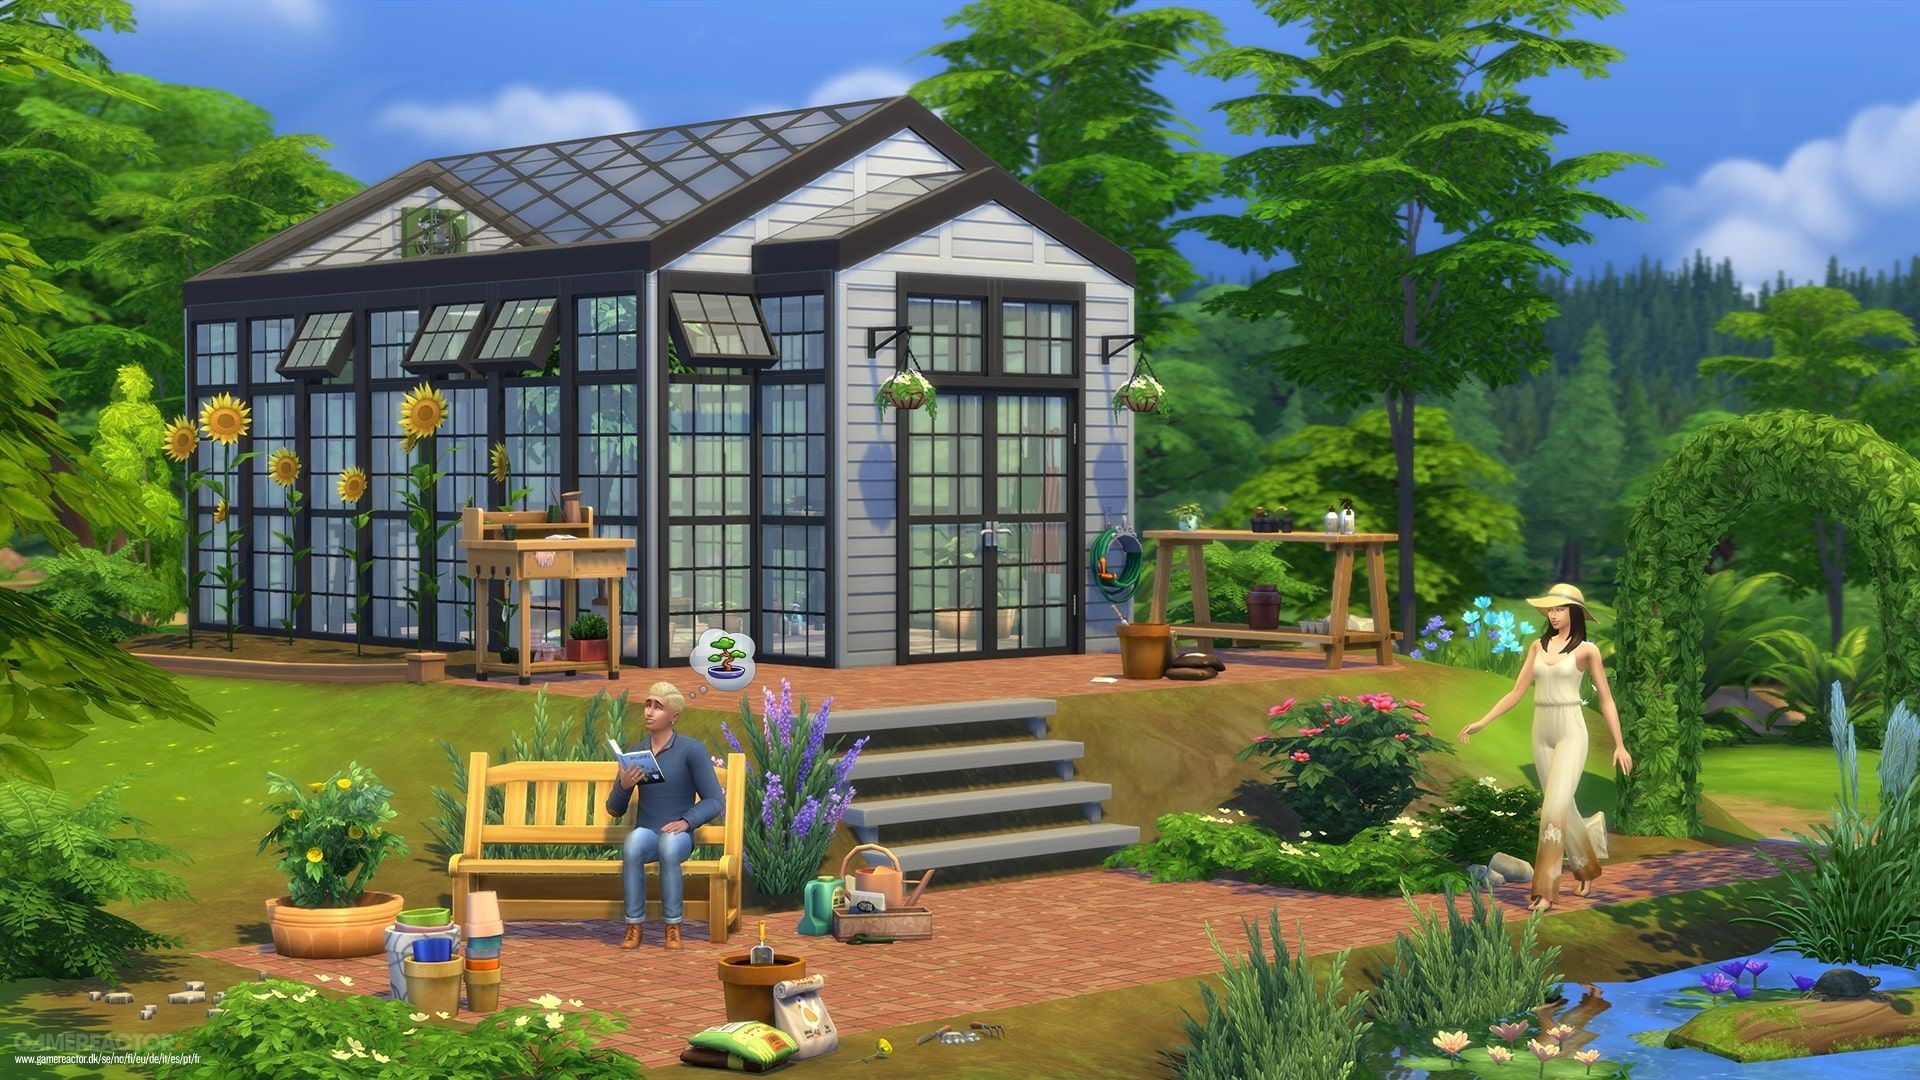 The Sims 4 is renovating the basement and the garden starting April 20